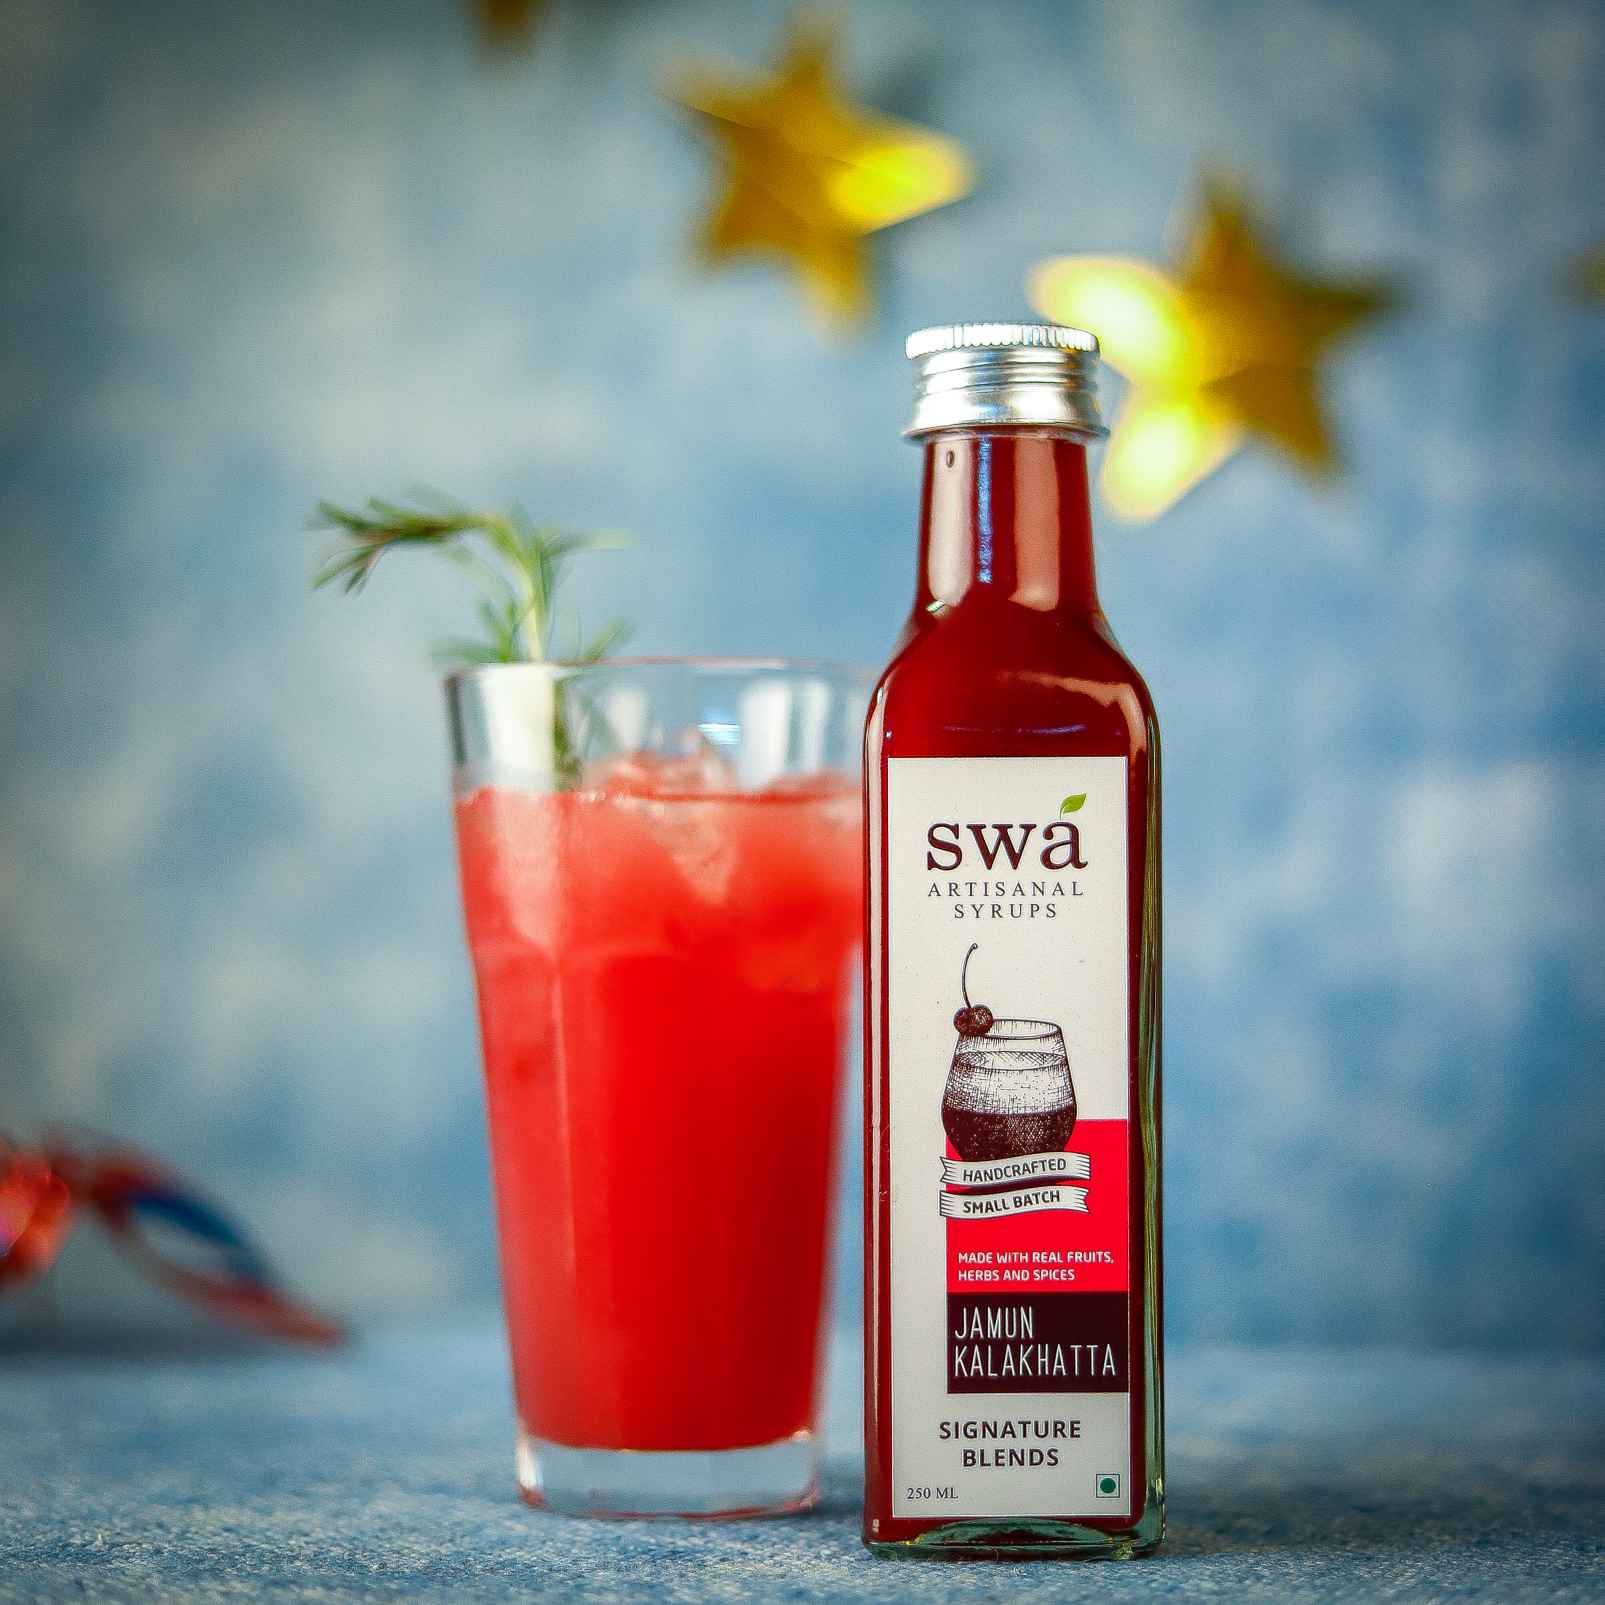 swa artisinal syrup in jamun kala khatta flavour with a glass of red coloured juice 